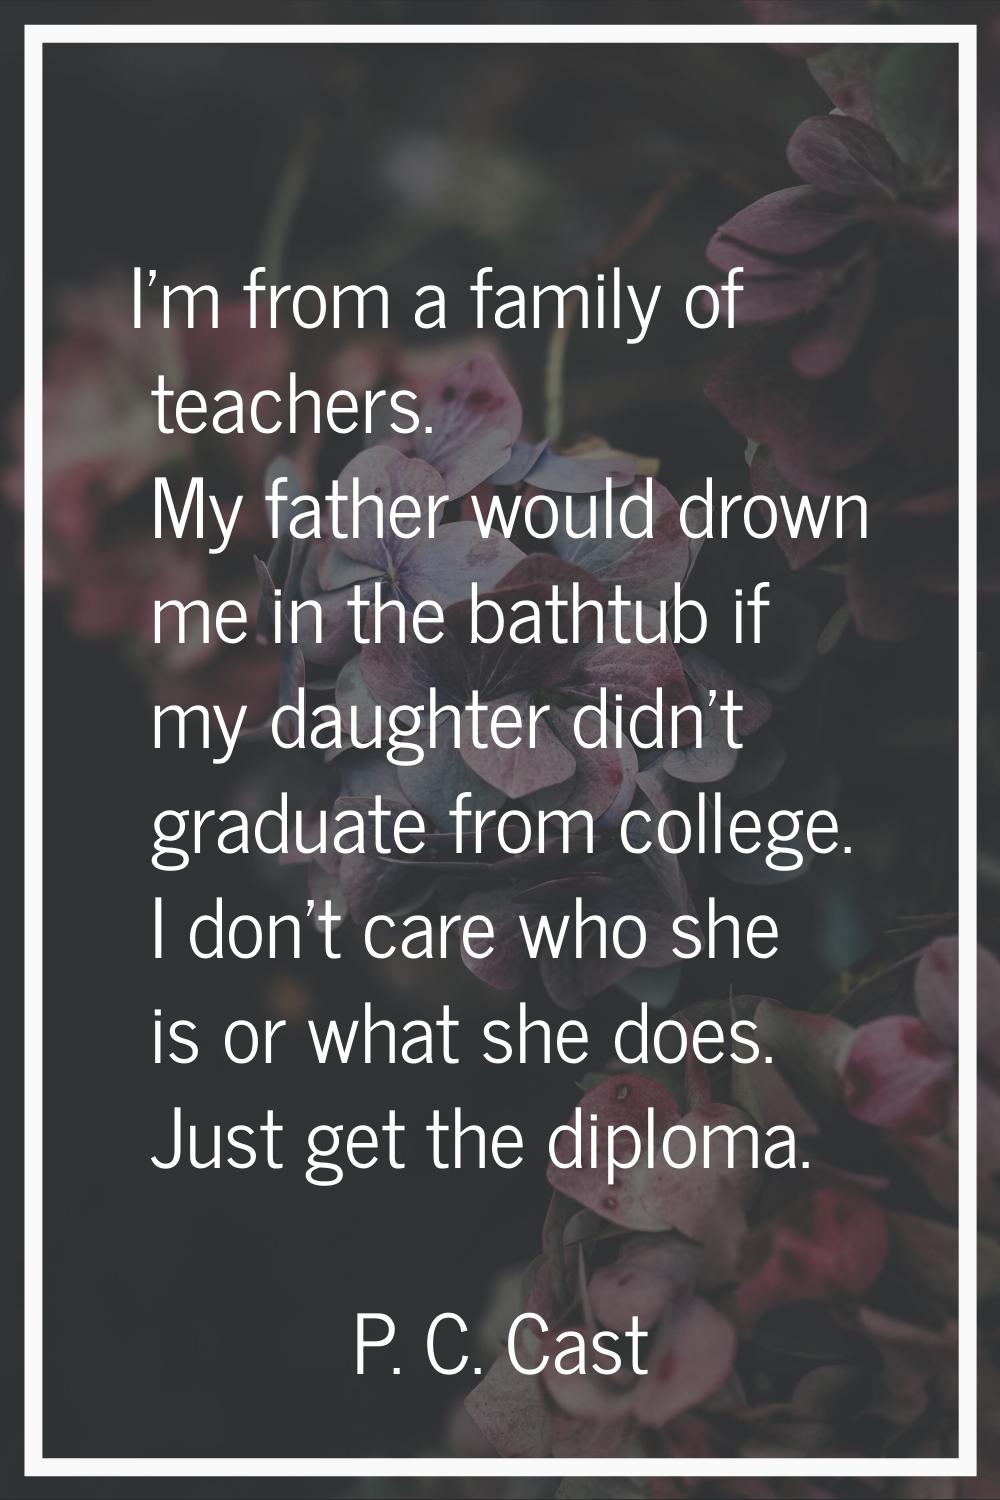 I'm from a family of teachers. My father would drown me in the bathtub if my daughter didn't gradua